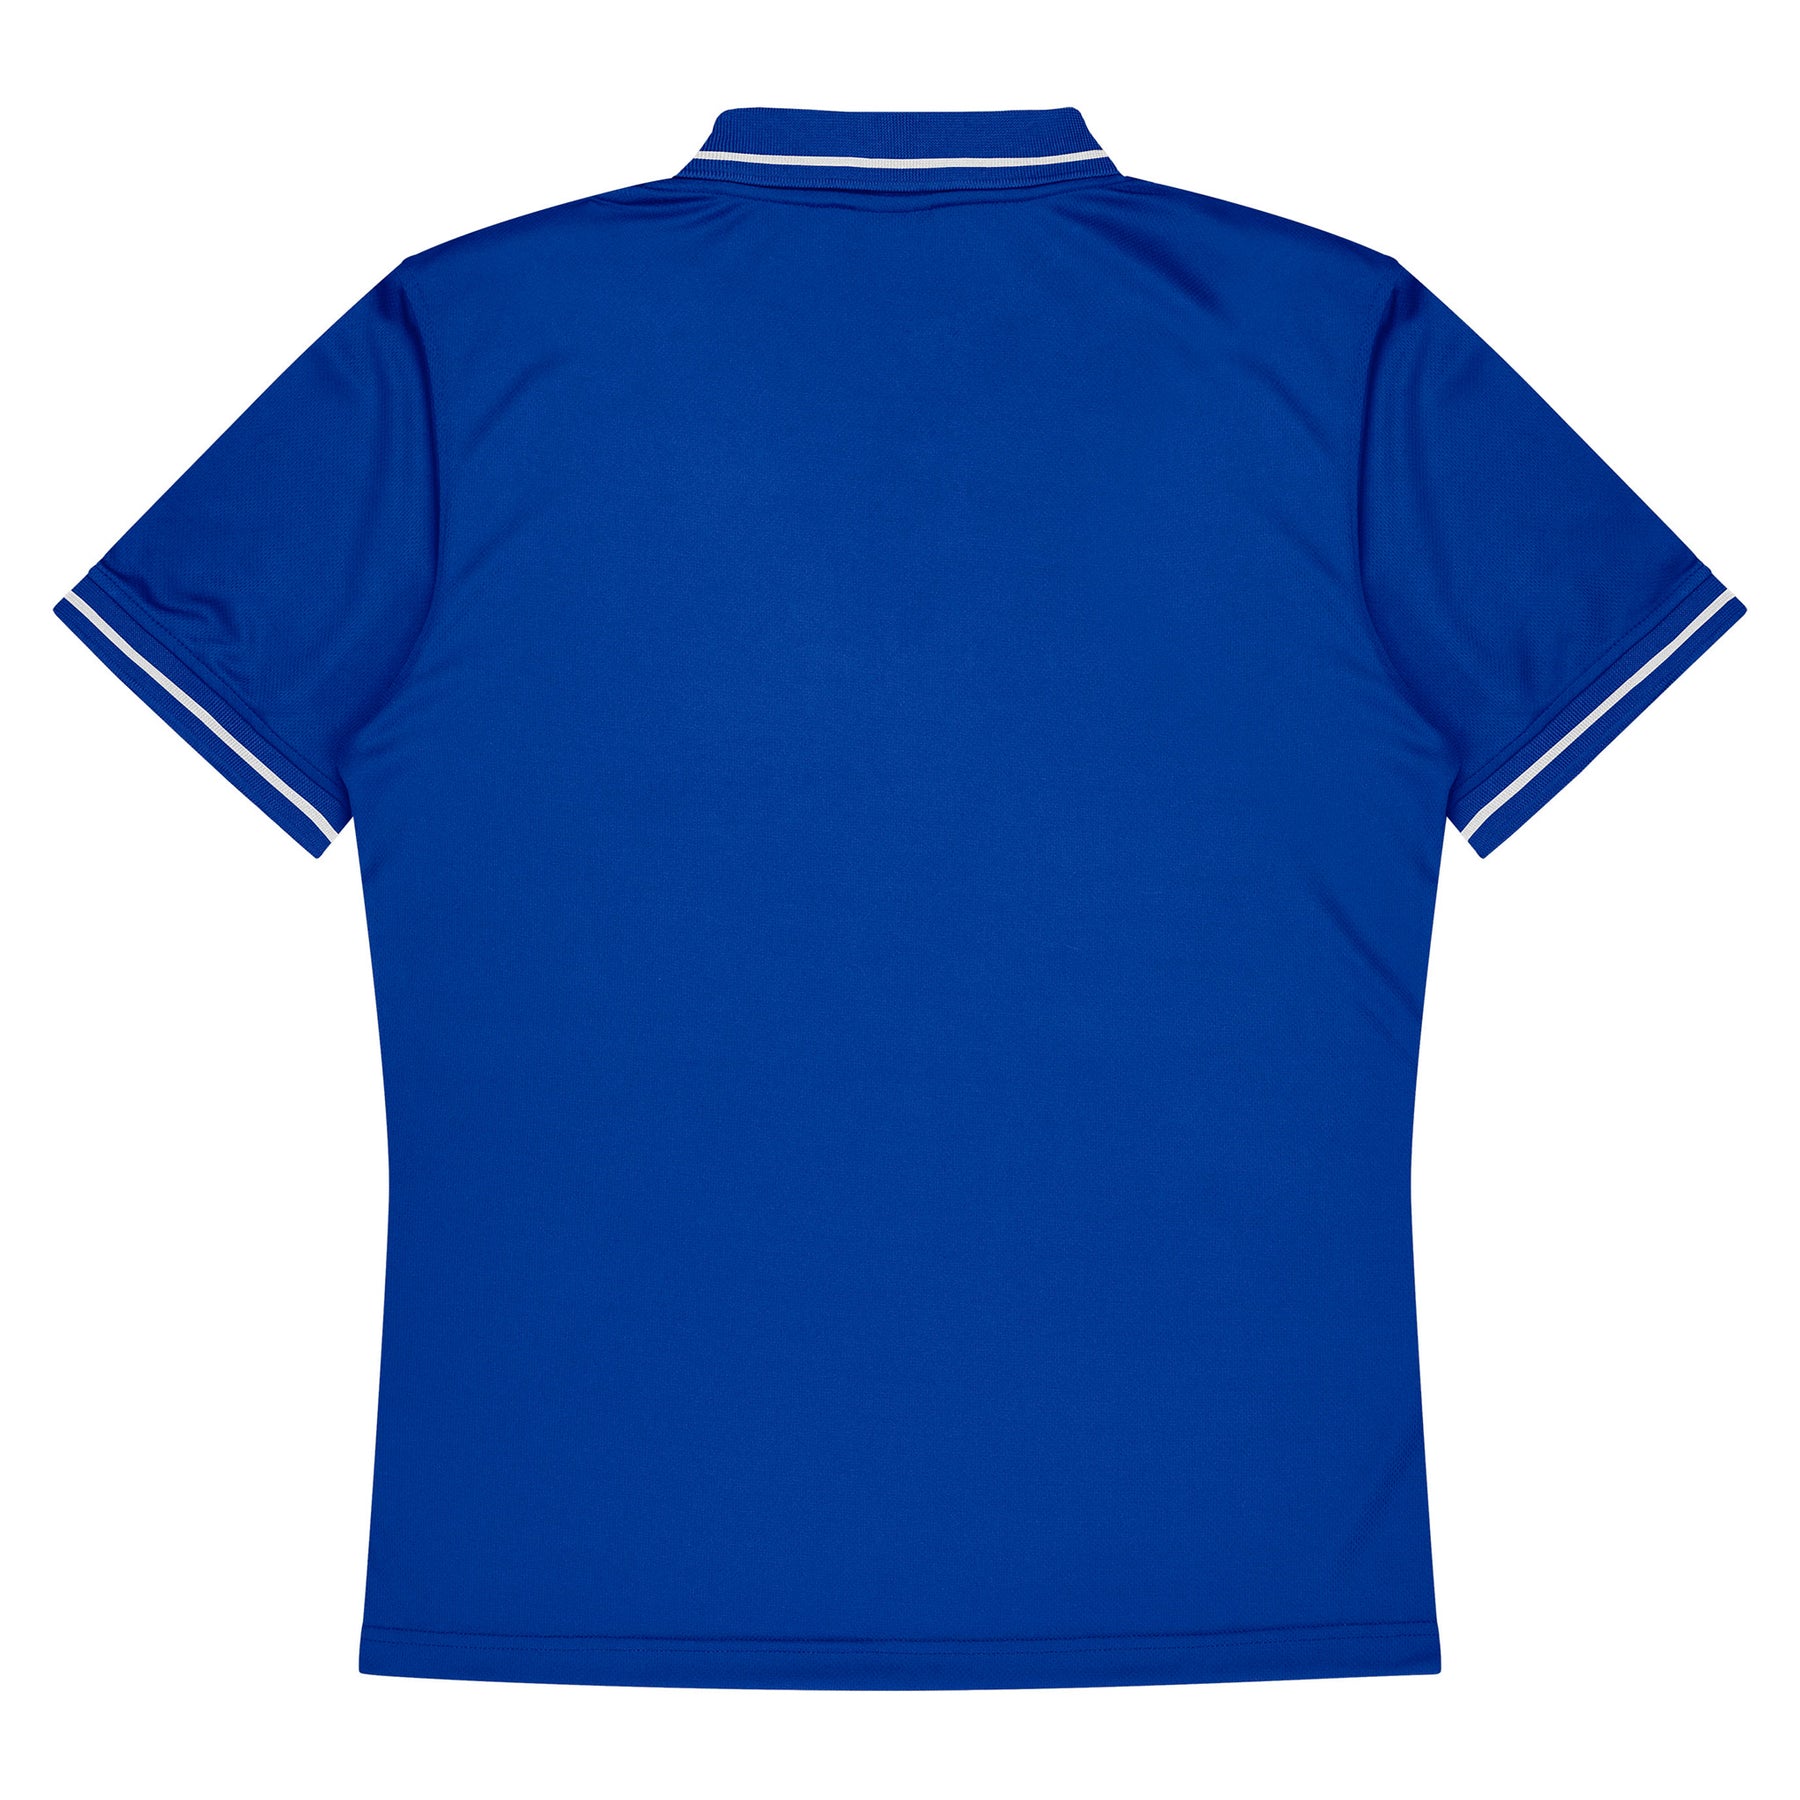 aussie pacific cottesloe mens polo in royal white